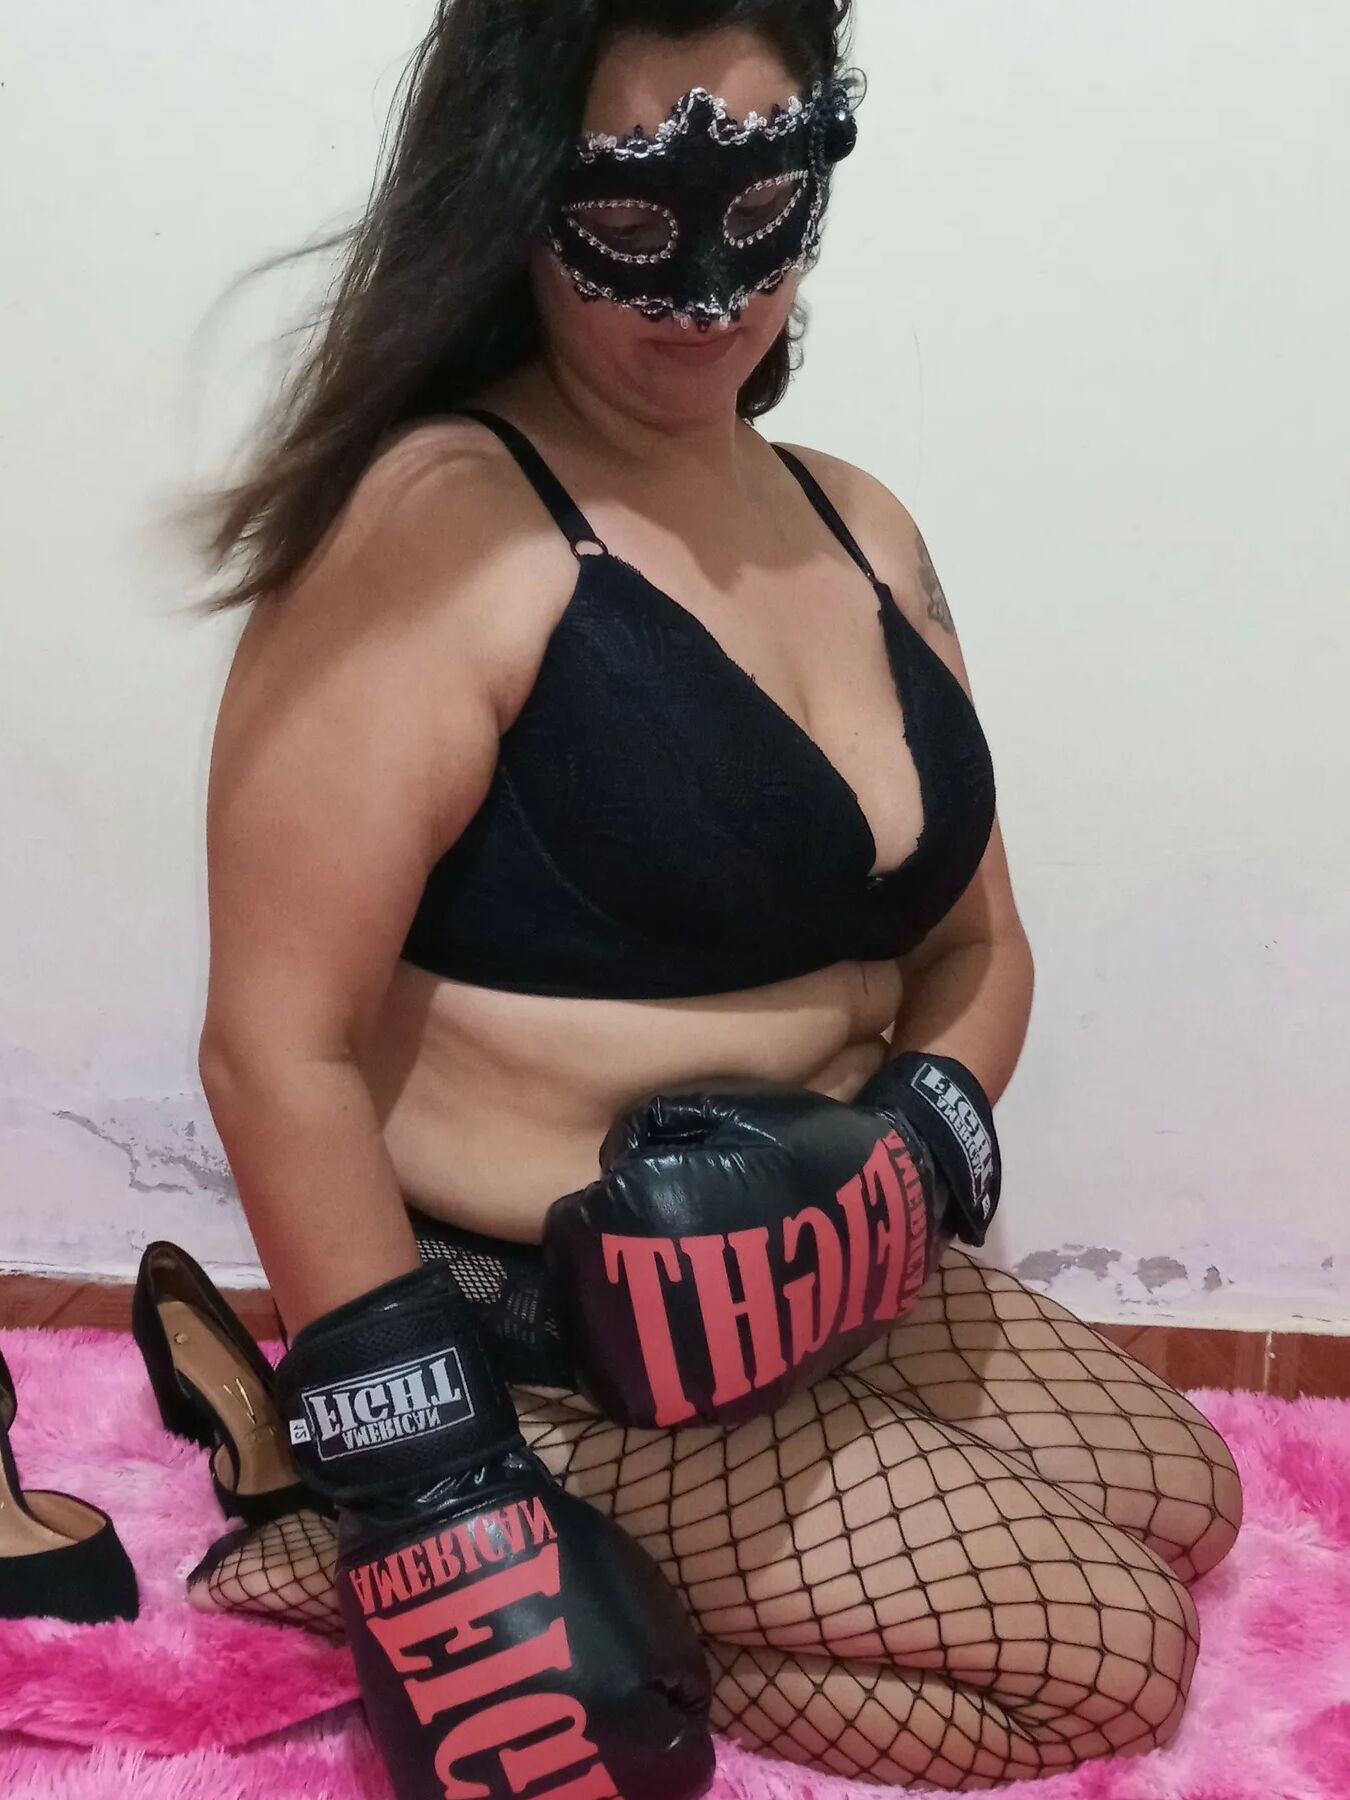 THE MASQUERADE AFTER MUAY THAI TRAINING